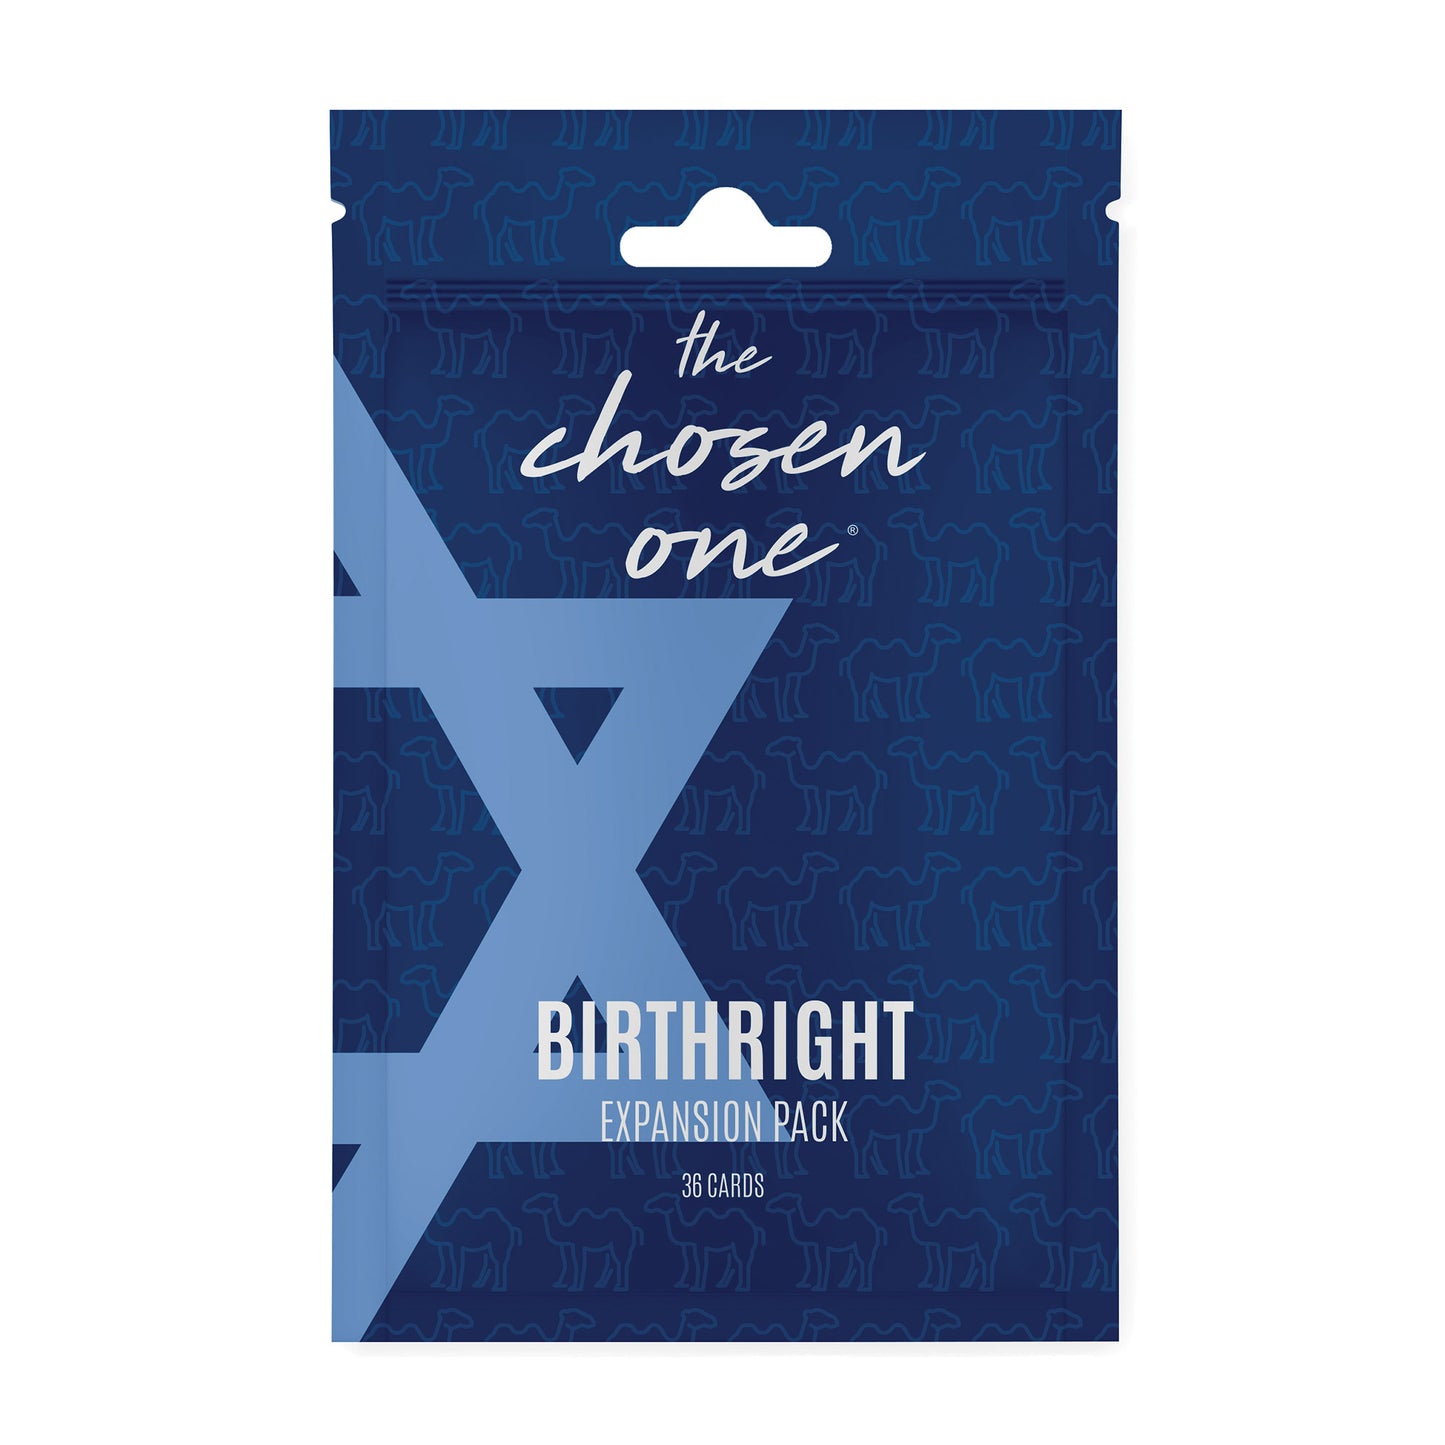 The Chosen One® - Birthright Expansion Pack